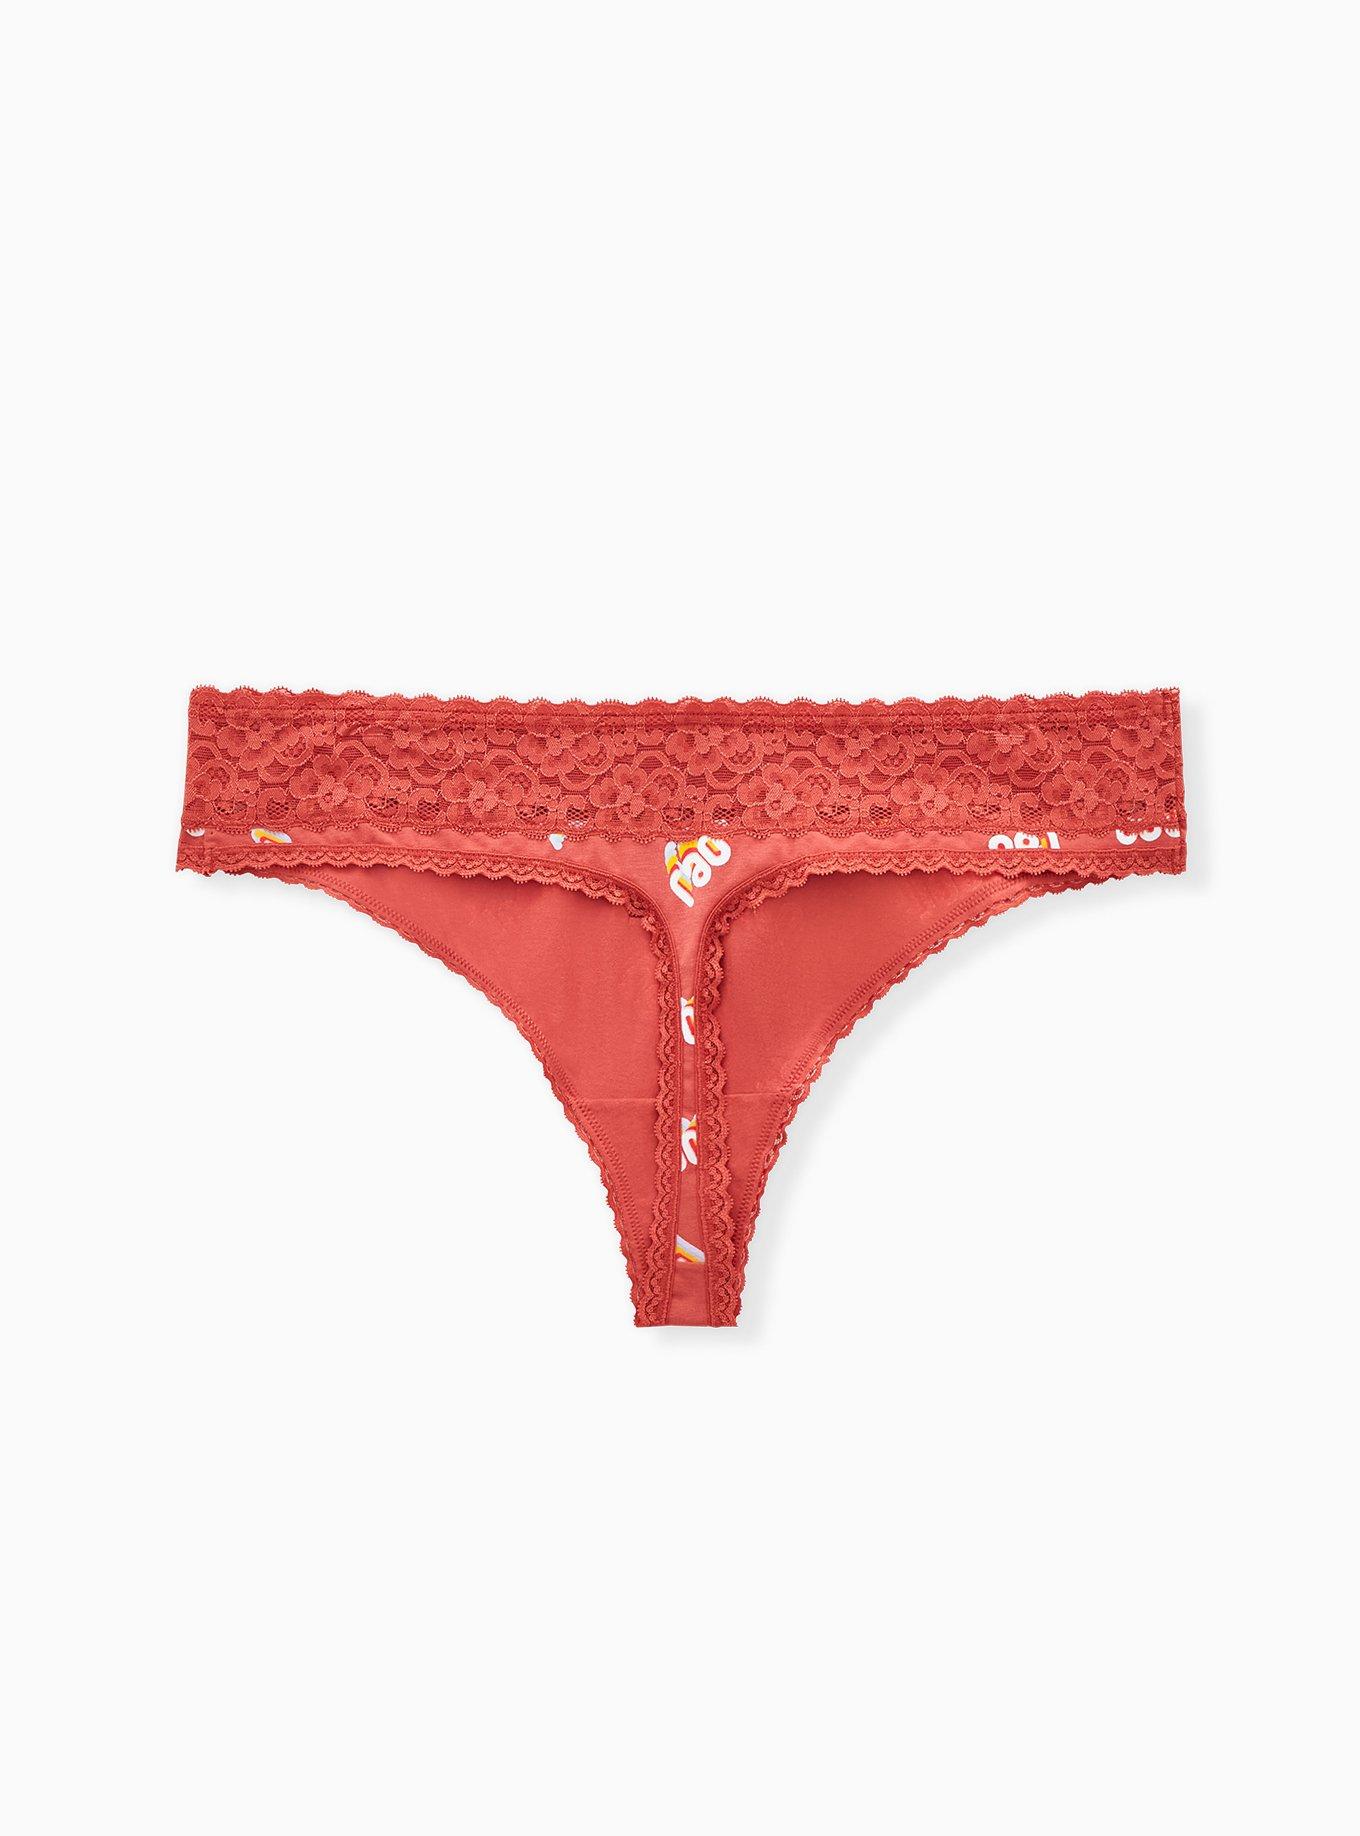 Le Body Perforated Knit Panty